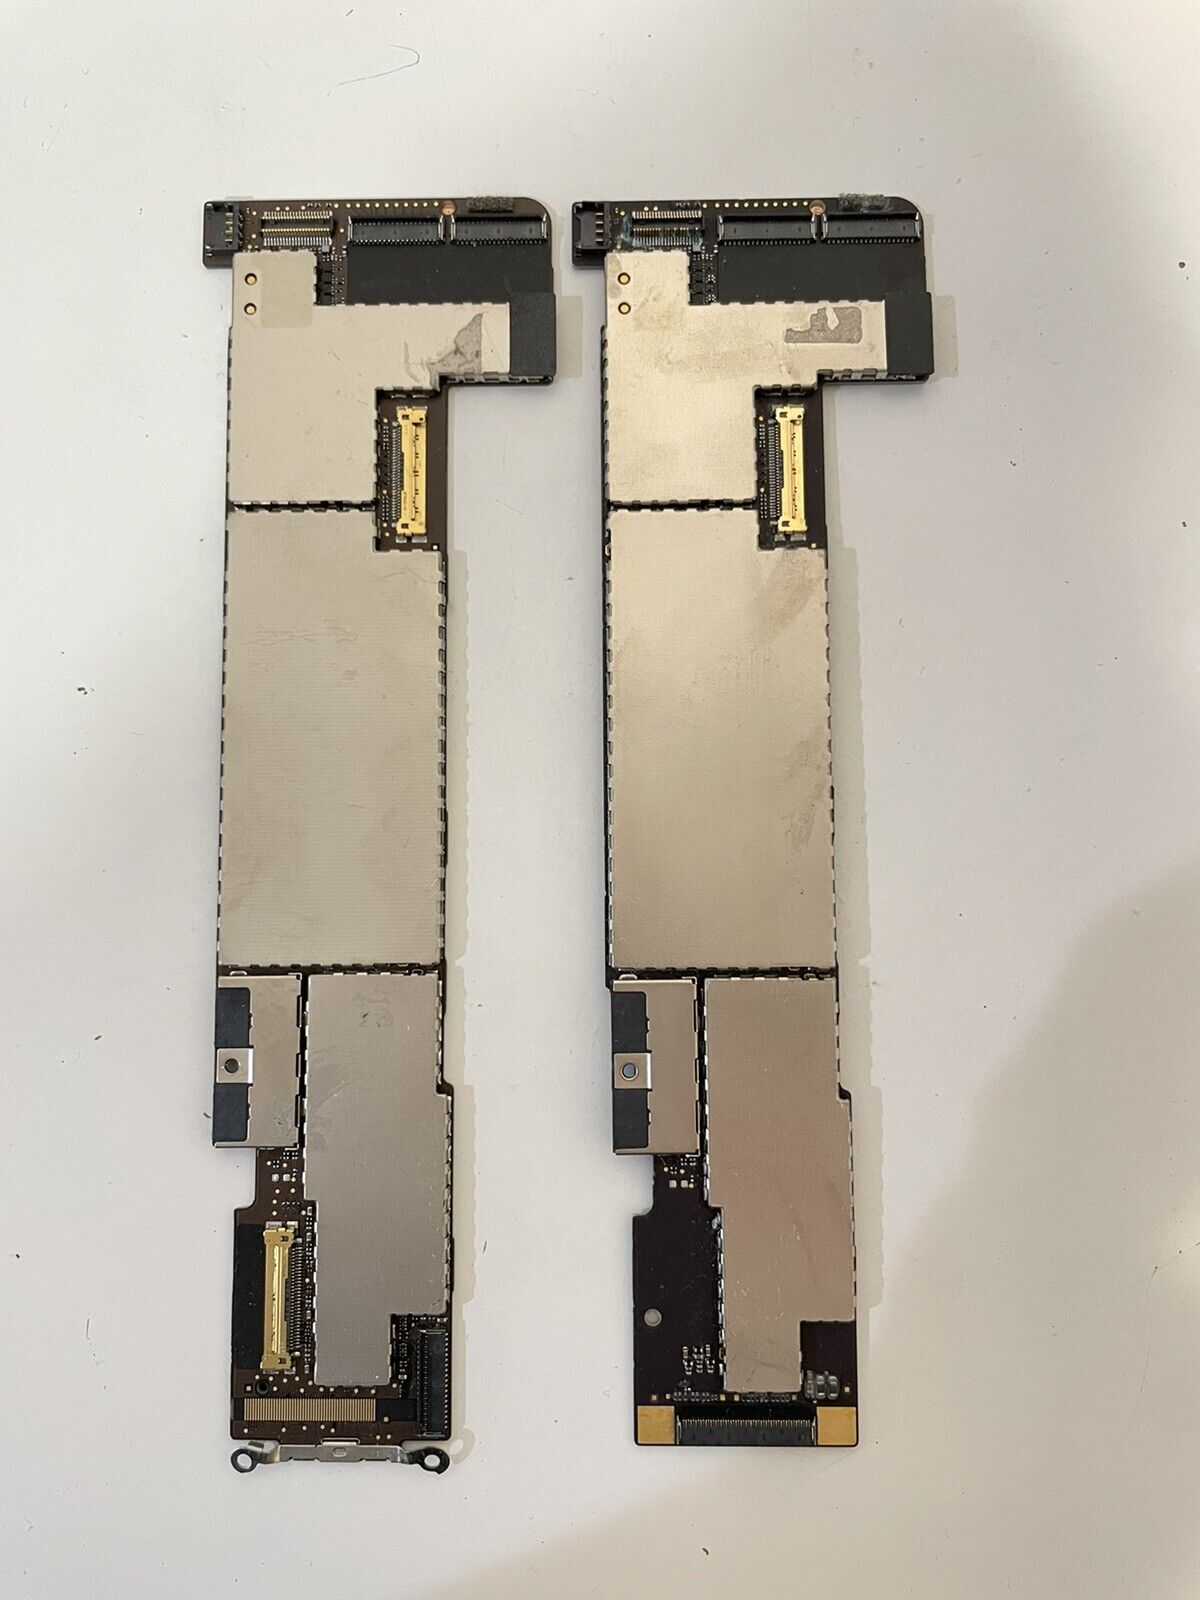 AS IS Lot of 2X Apple iPad 2 2nd Gen. Logic Board Motherboards A1395 FOR PARTS